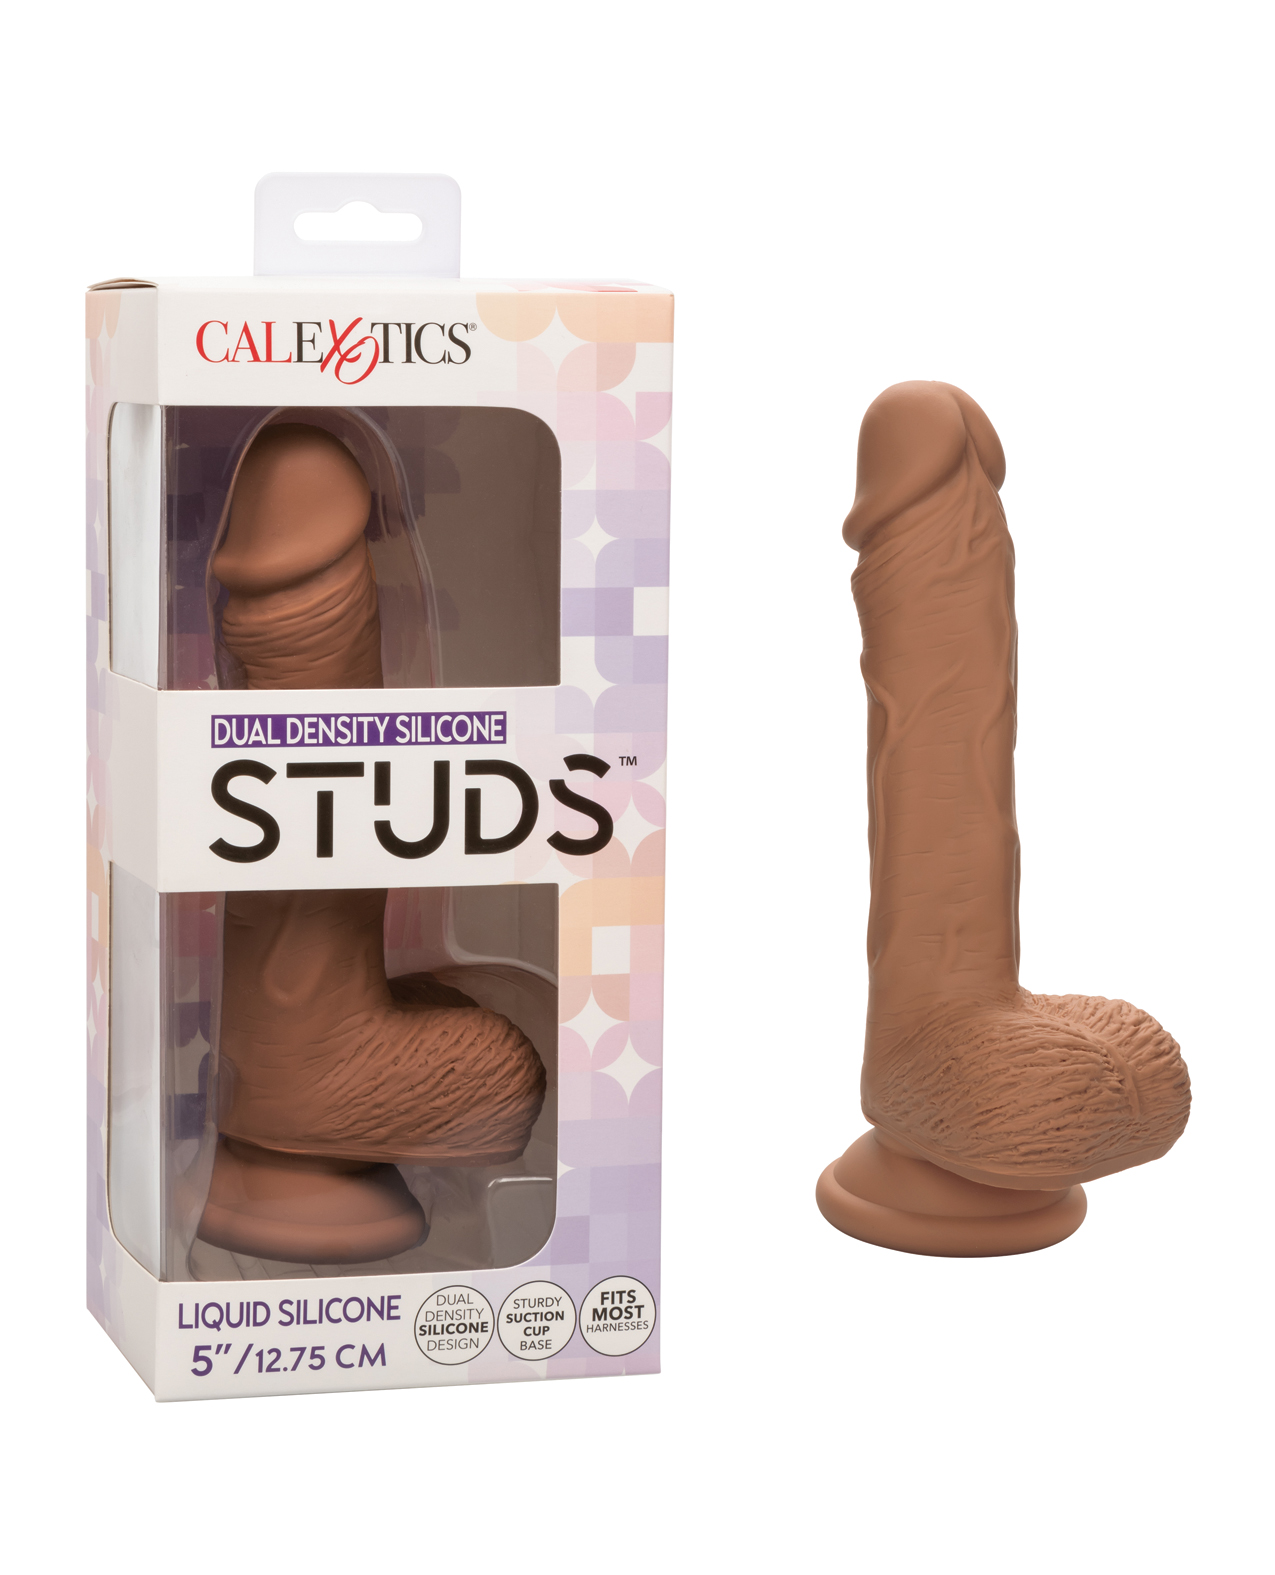 Brown dildo is sitting outside of a box with a brown dildo also in the pastel colored box.